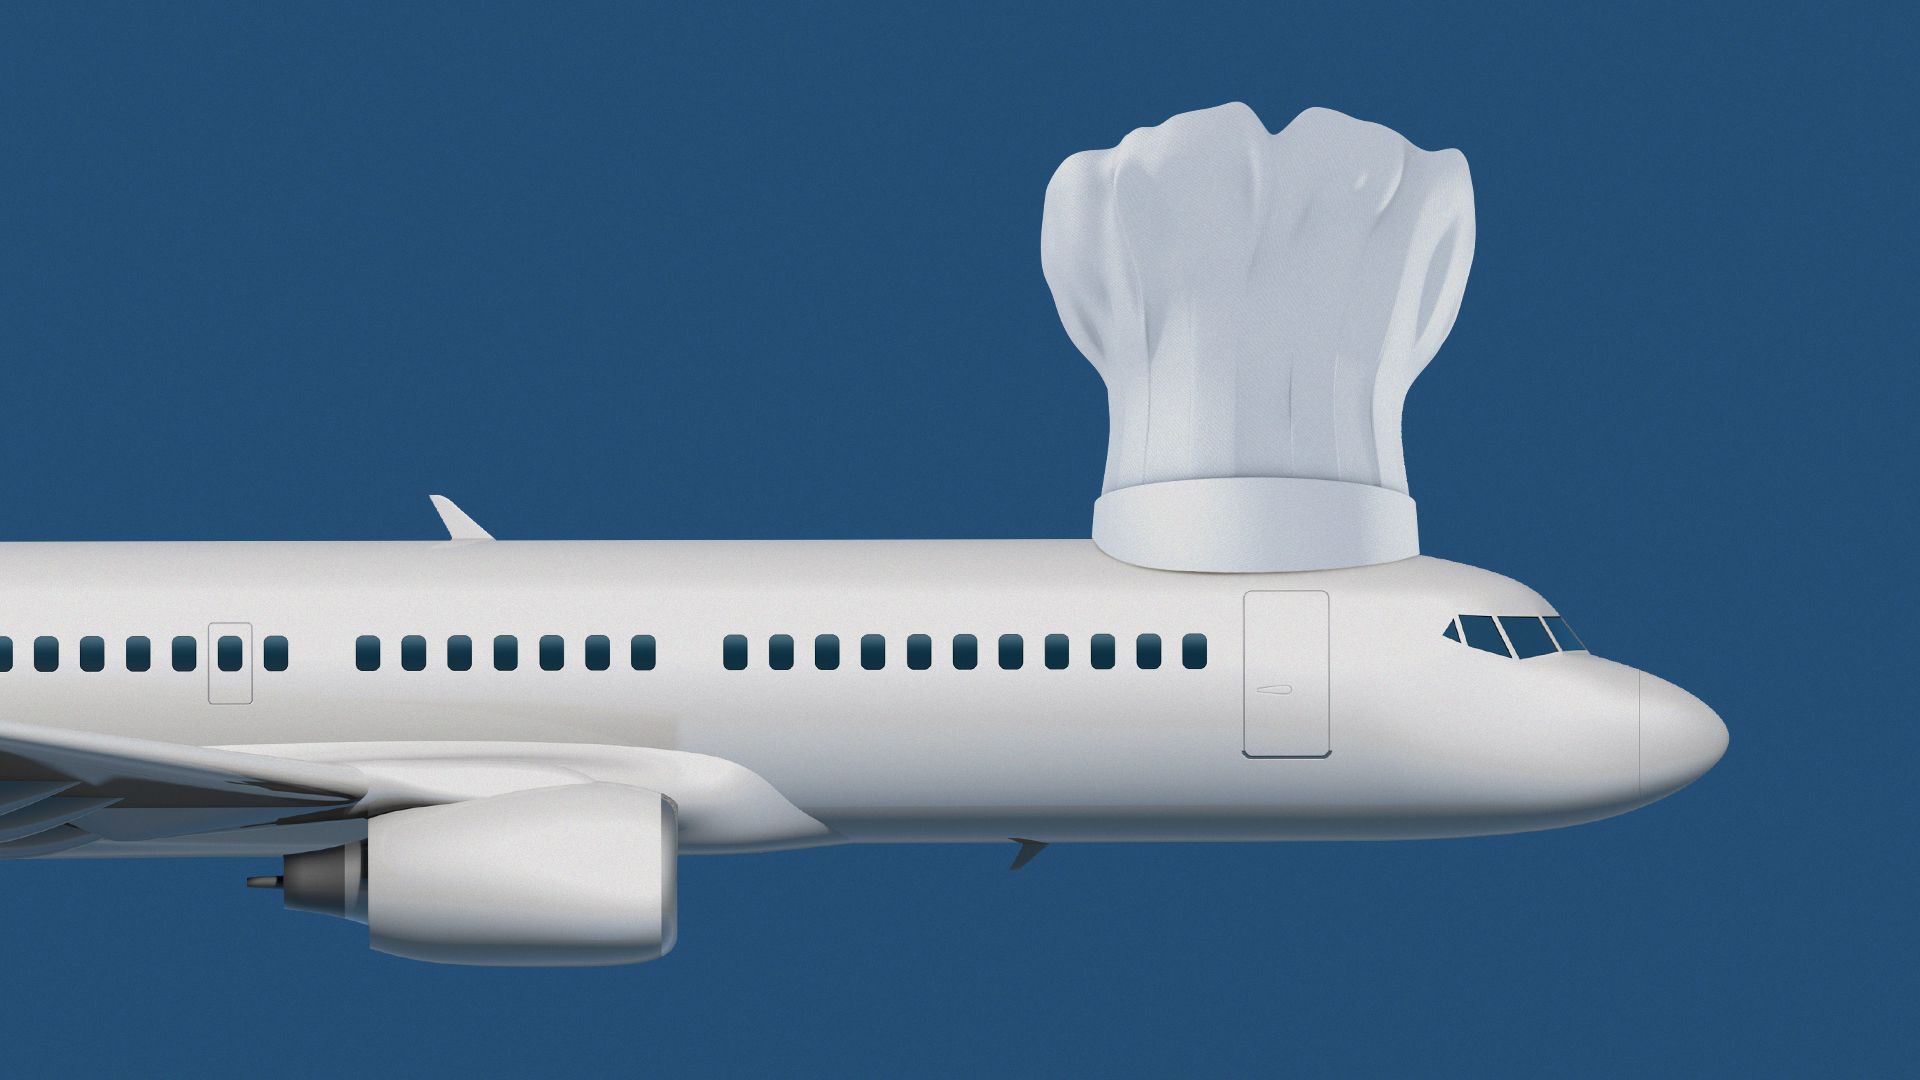 Illustration of white plane wearing a chef's hat at the head of the plane.